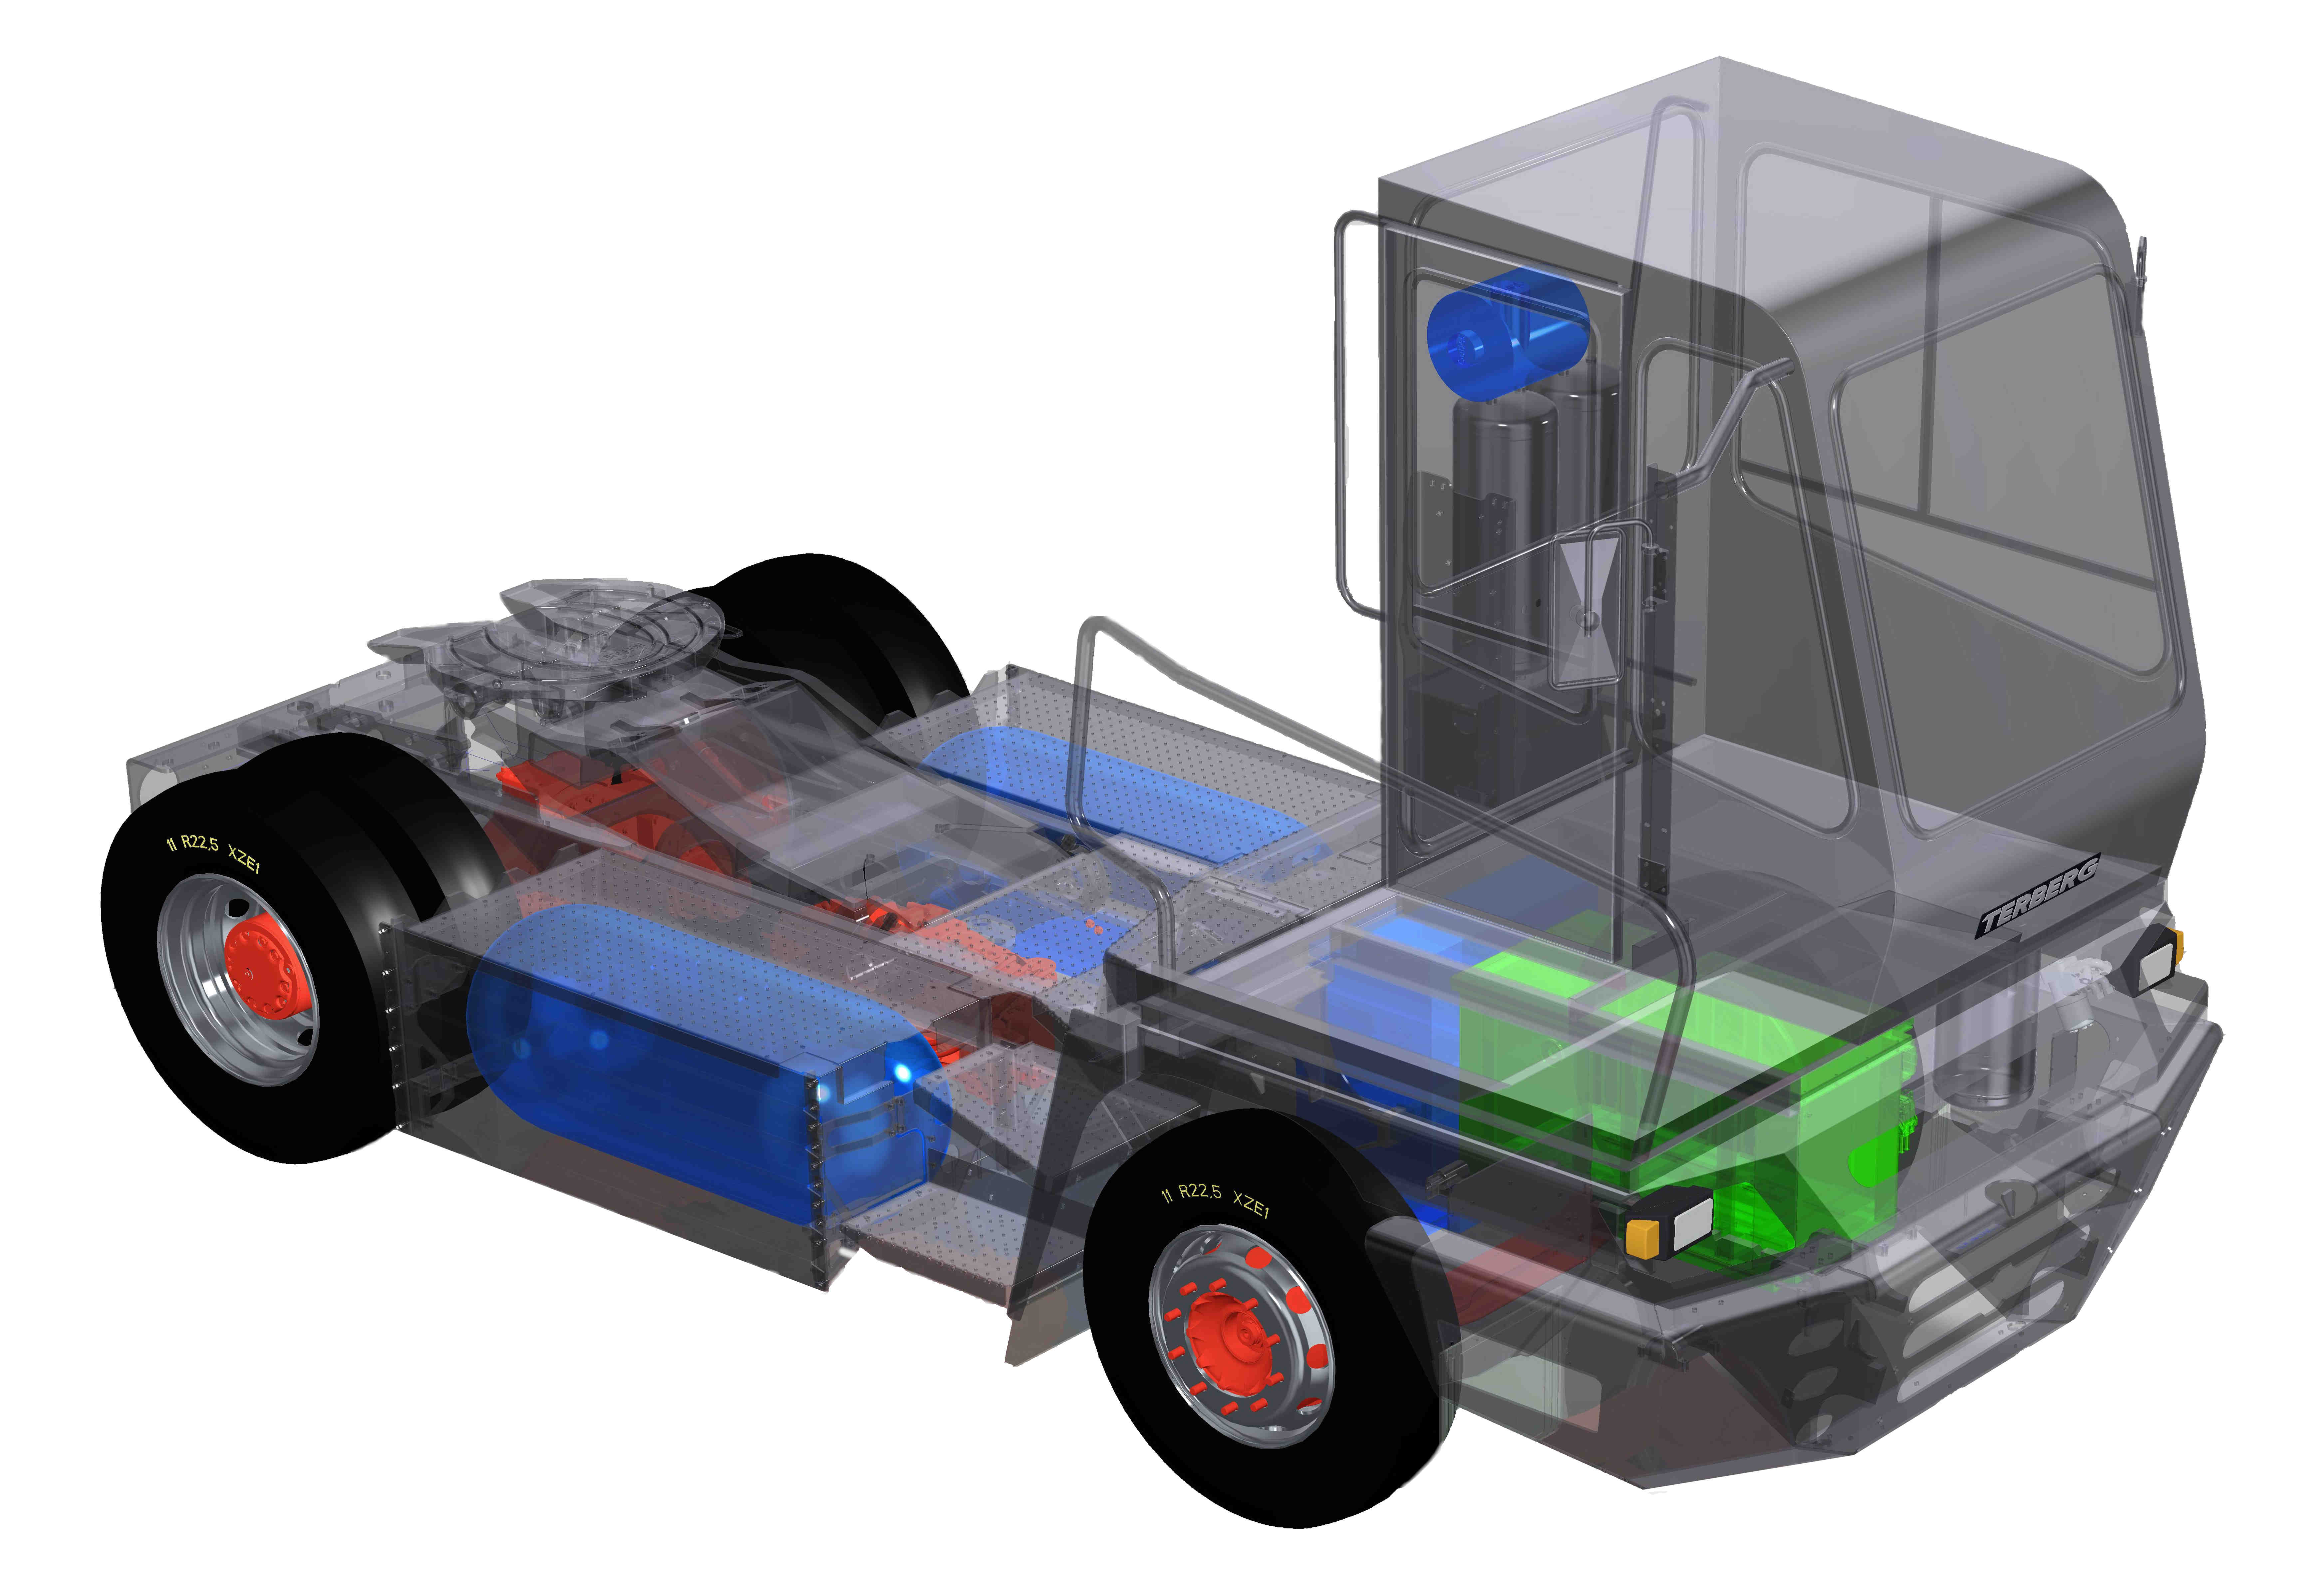 Render of hydrogen fuel cell powered terminal tractor in concept phase